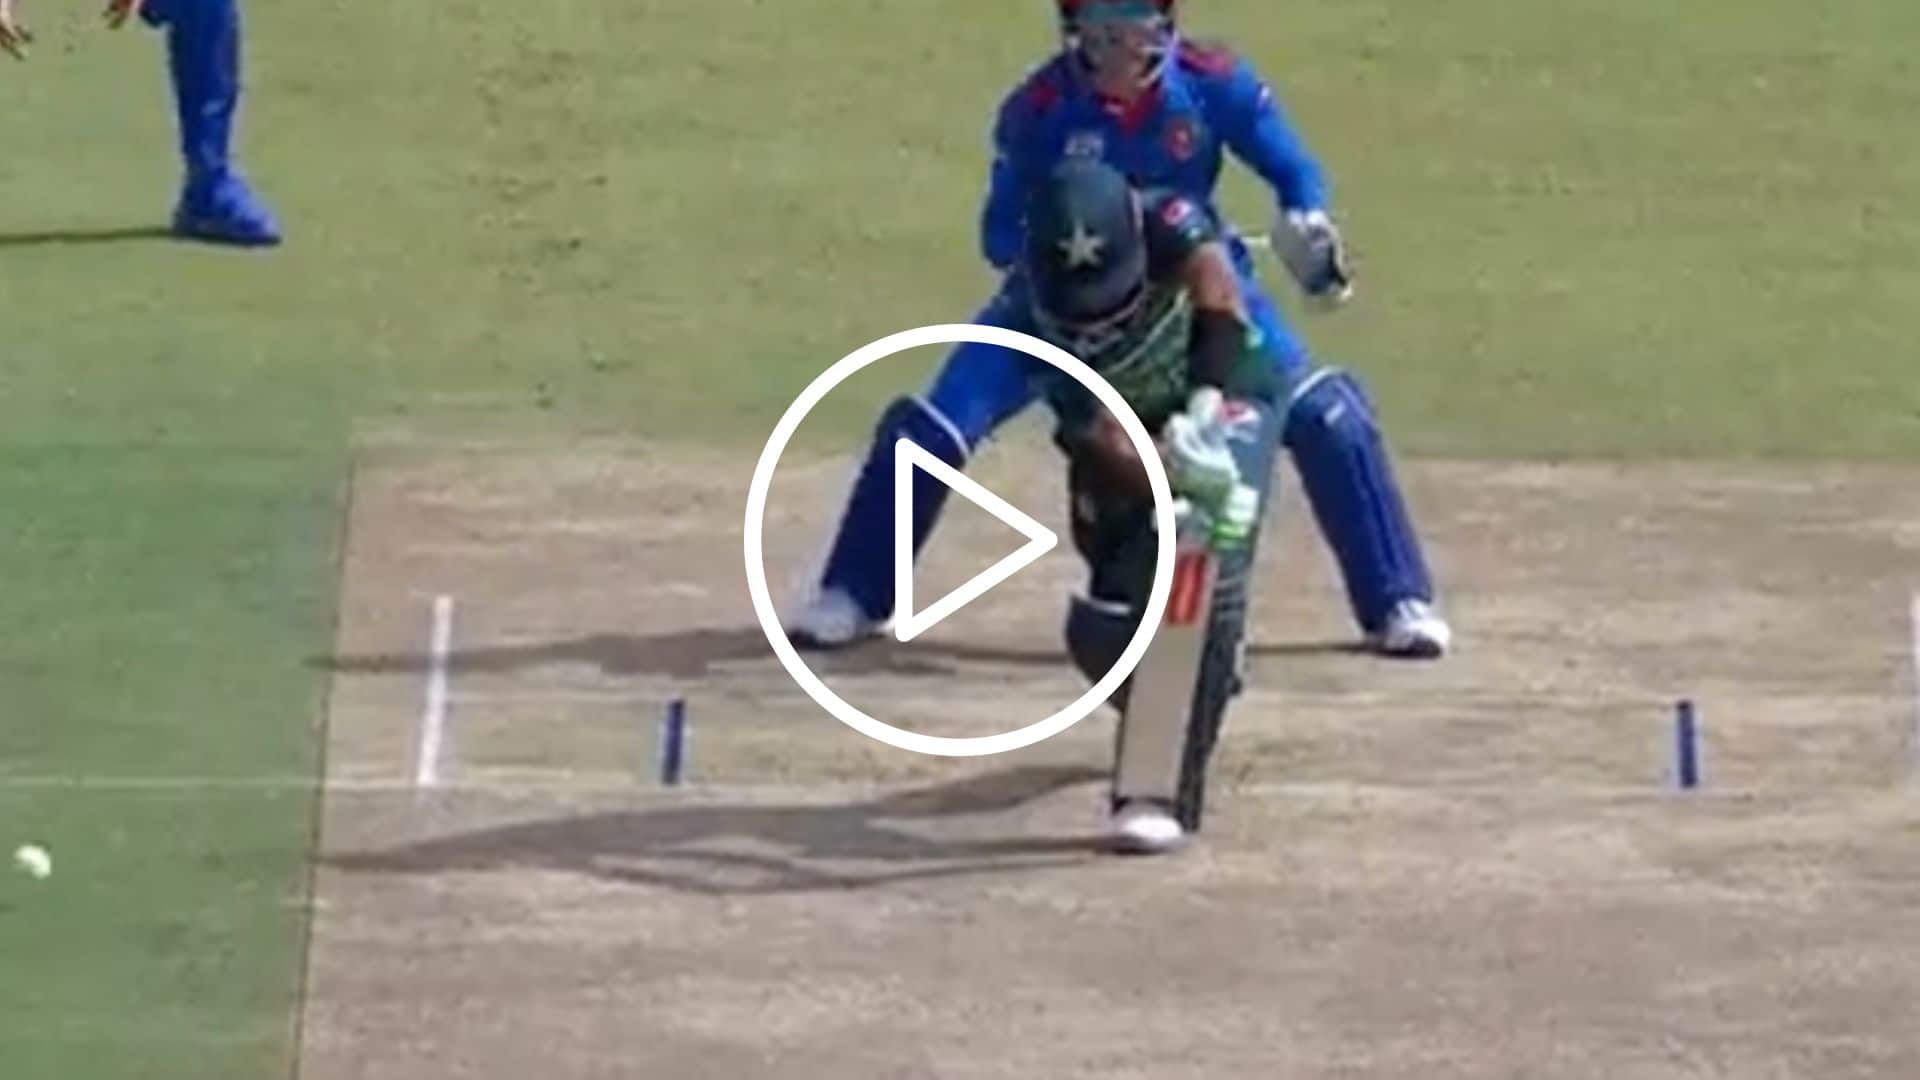 [Watch] Babar Azam Departs For A 3-Ball Duck Against Afghanistan